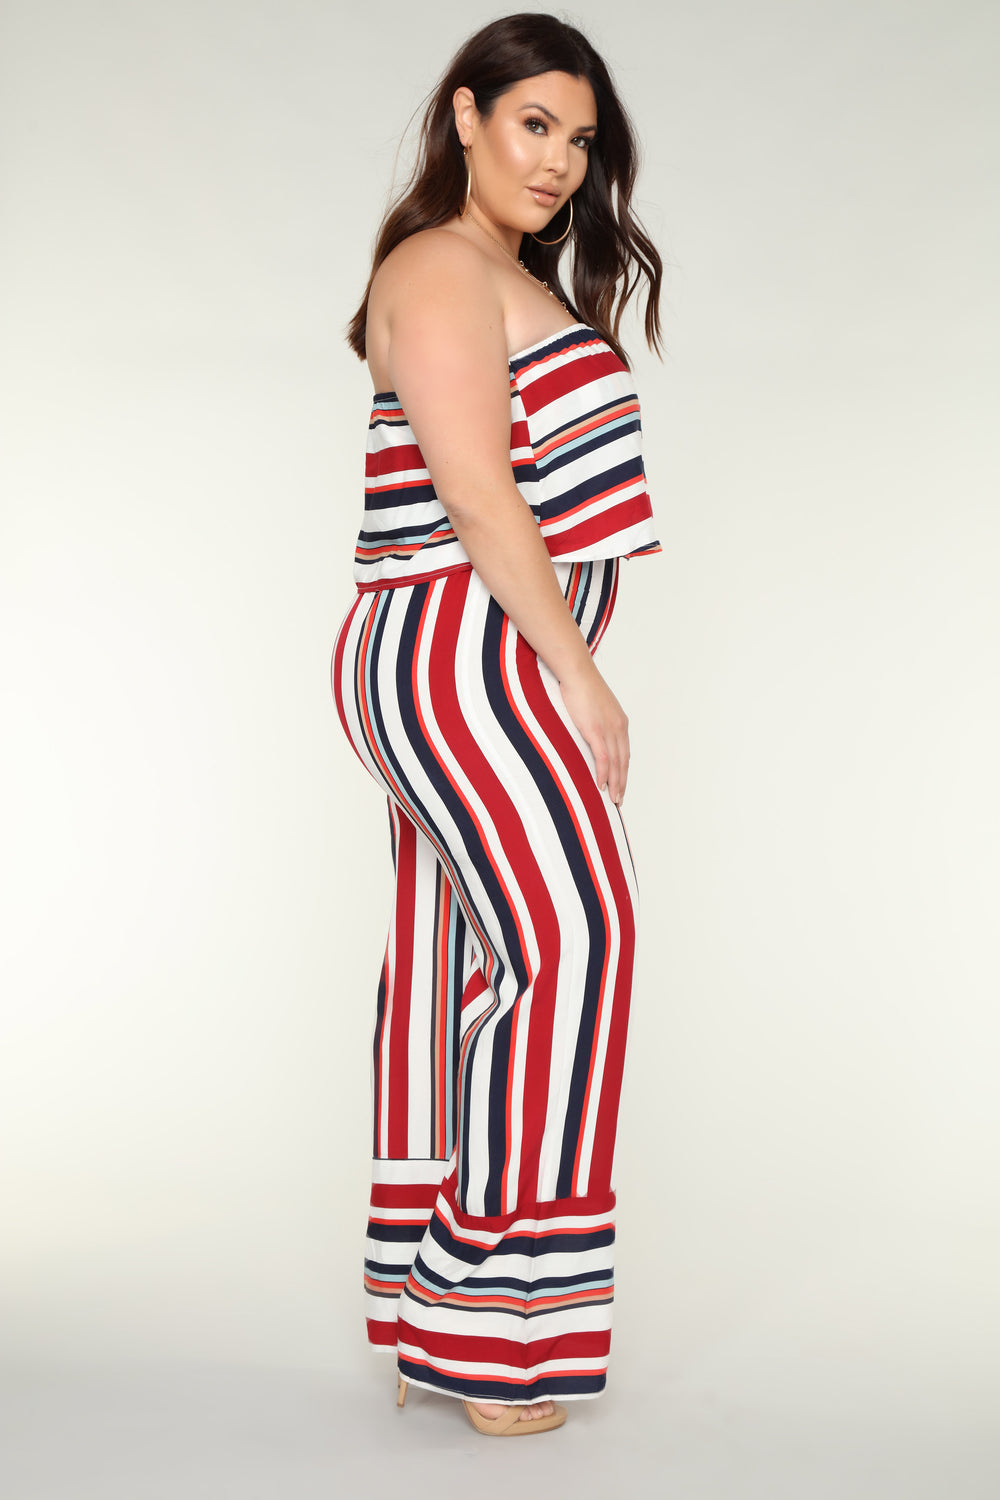 Best To You Jumpsuit - Red Multi